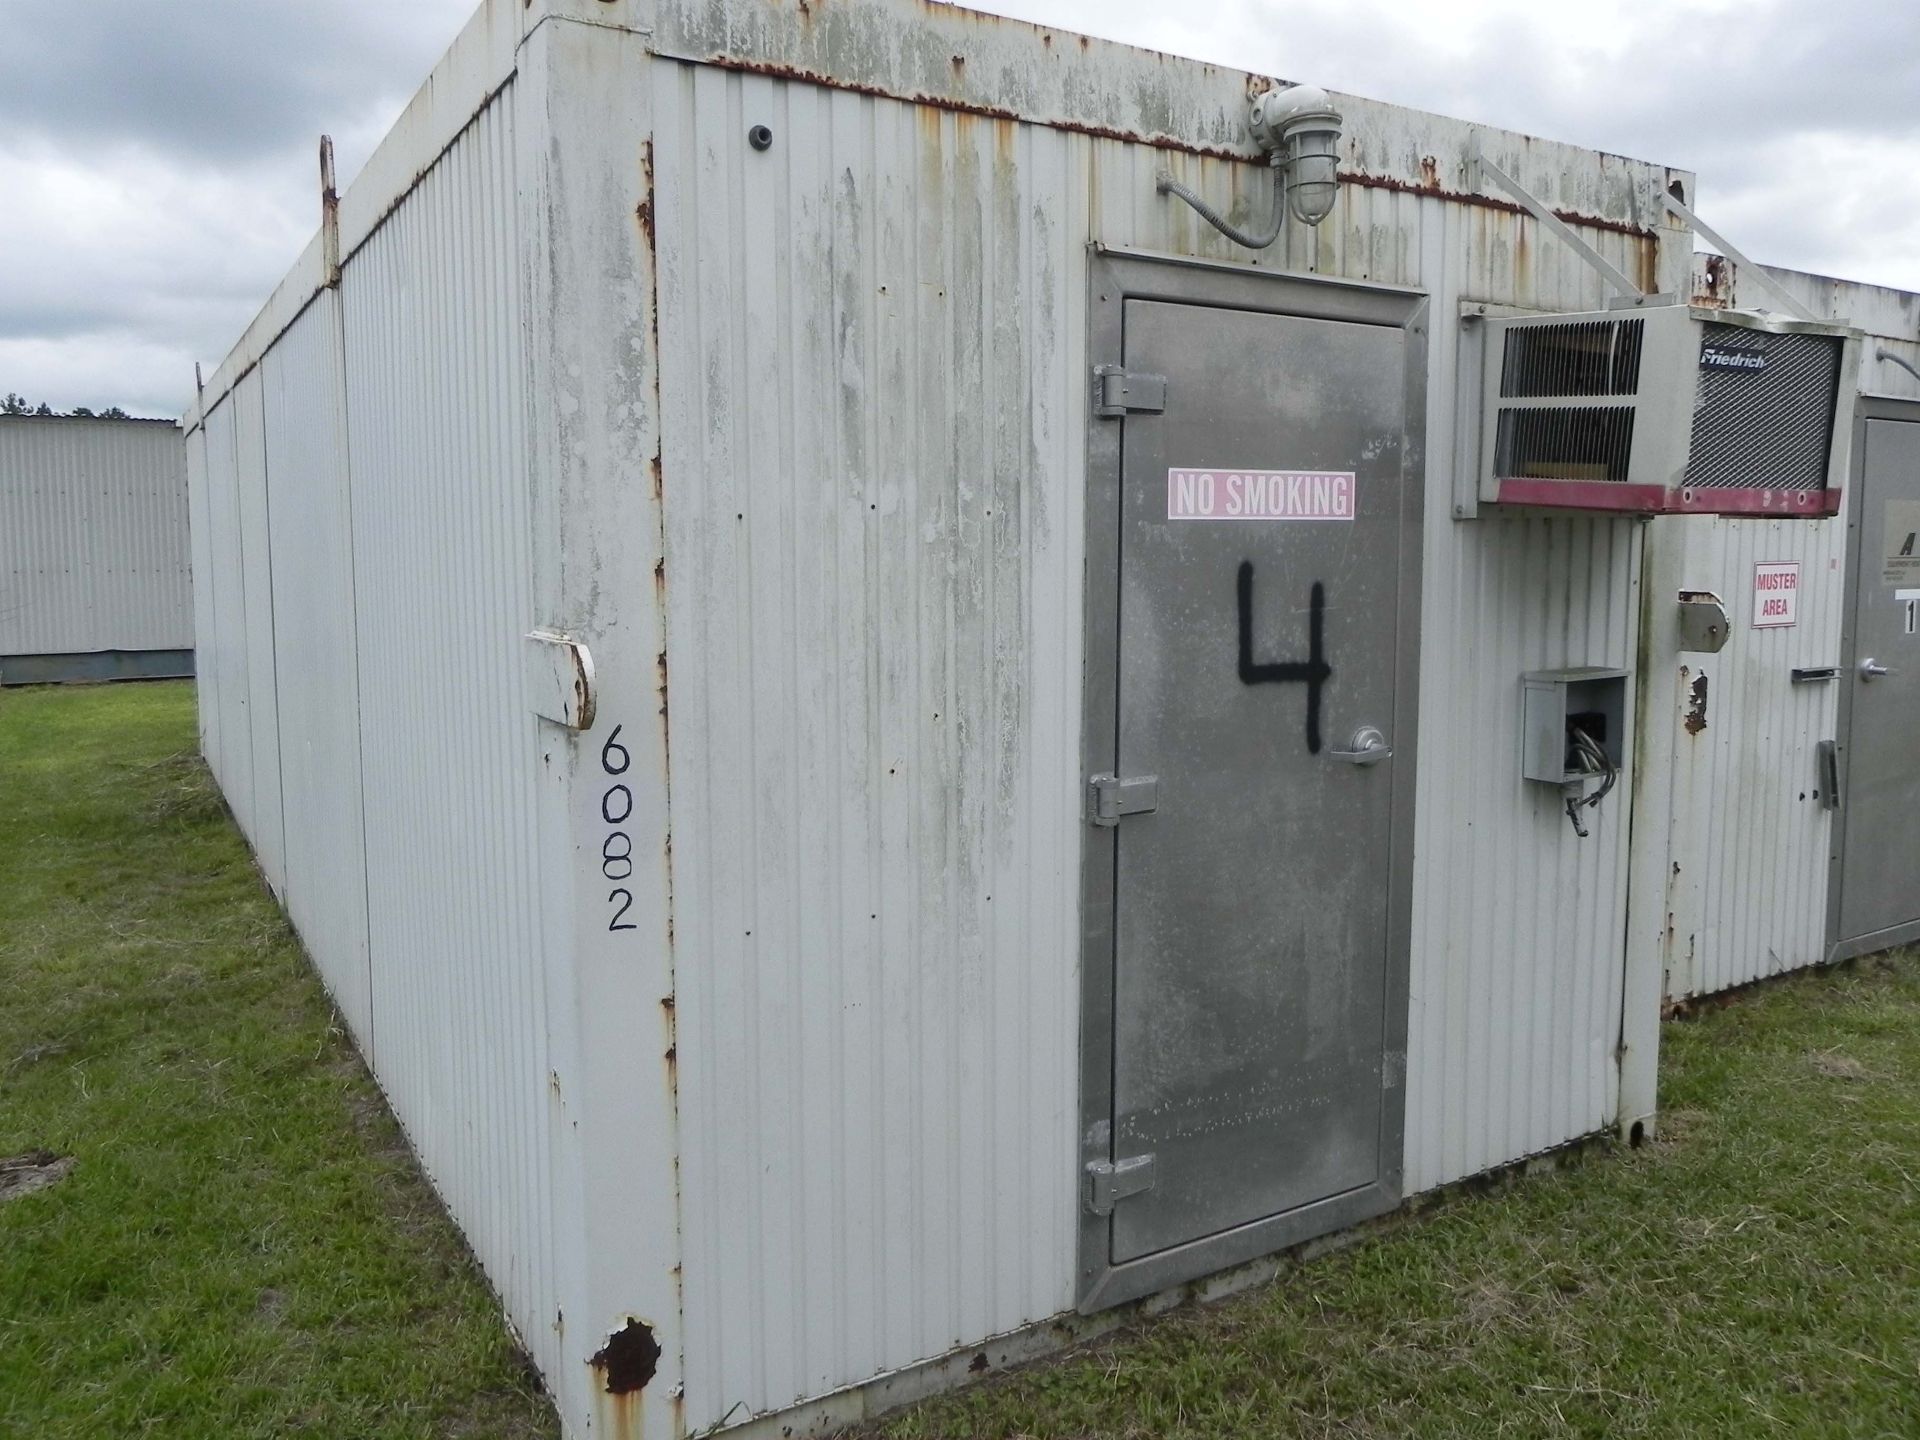 PORTABLE MAN CAMP LIVING QUARTERS, 10' x 32', 12-man sleeper unit, unit #6082. (Located offsite at